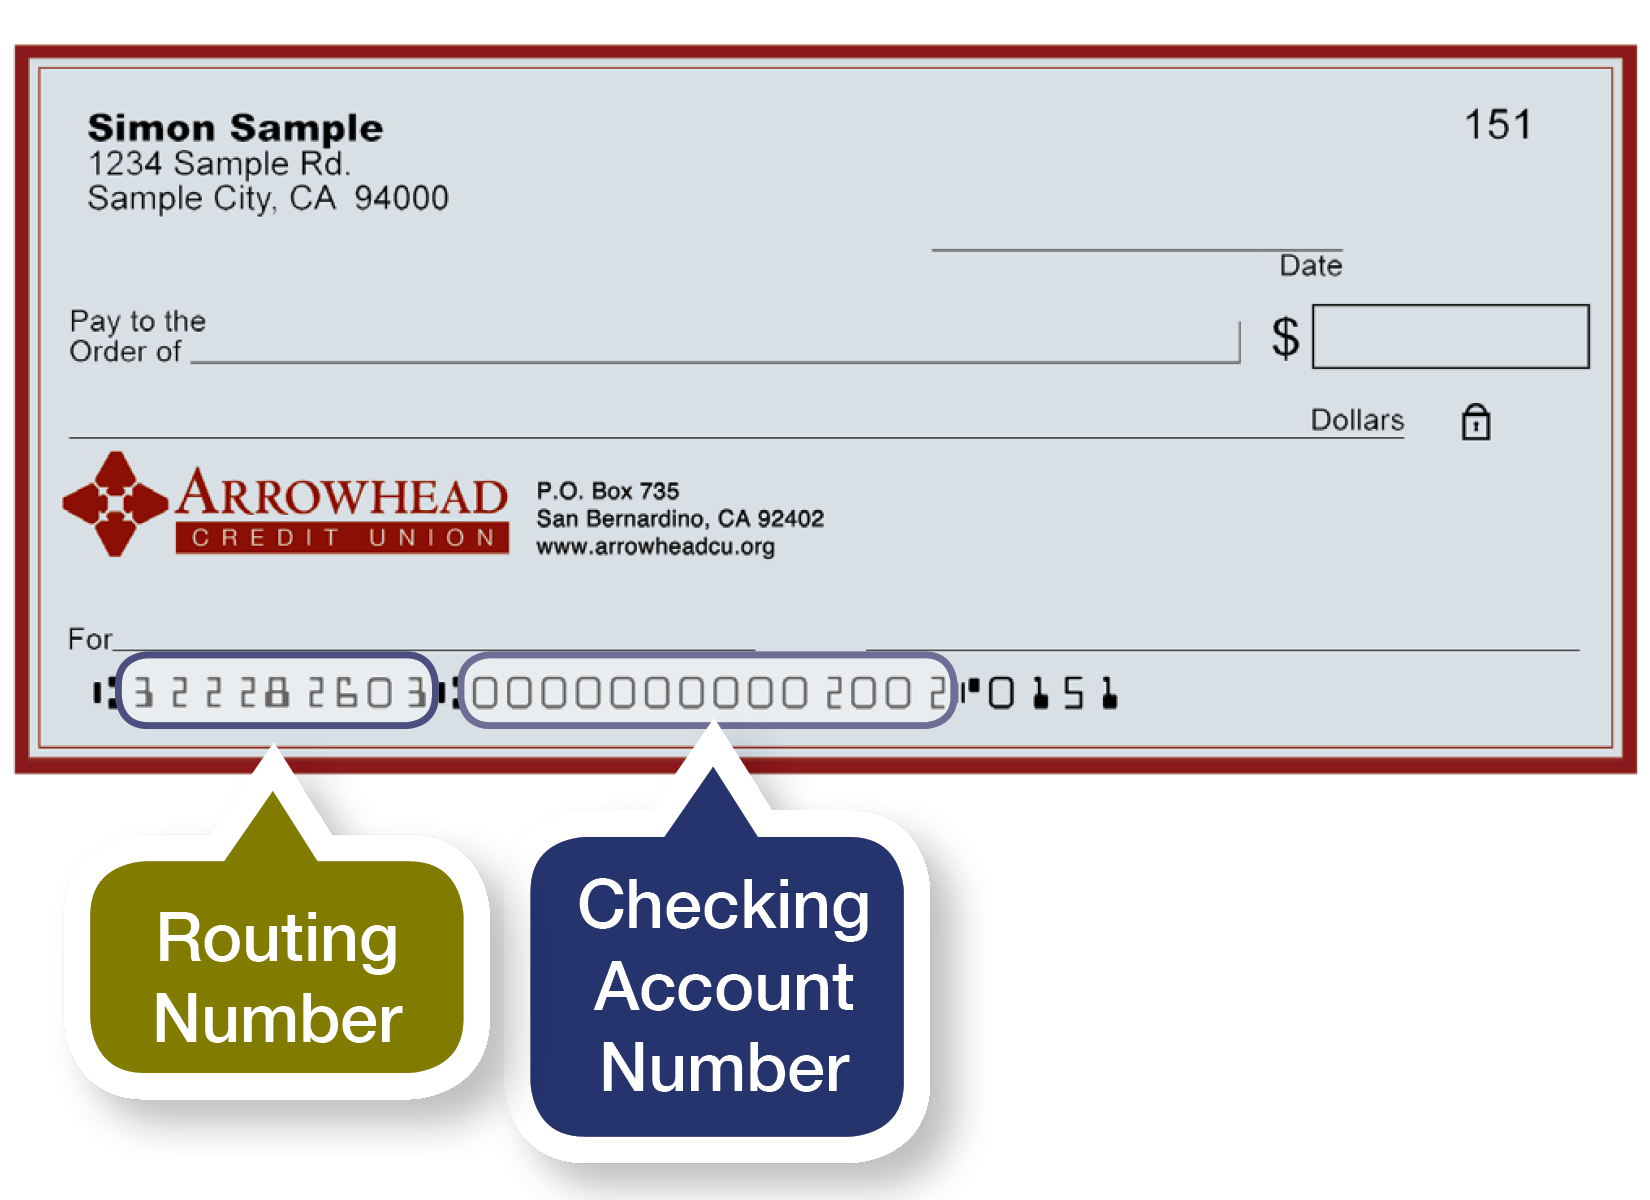 how to find a bank with a routing number - how to find a bank with a